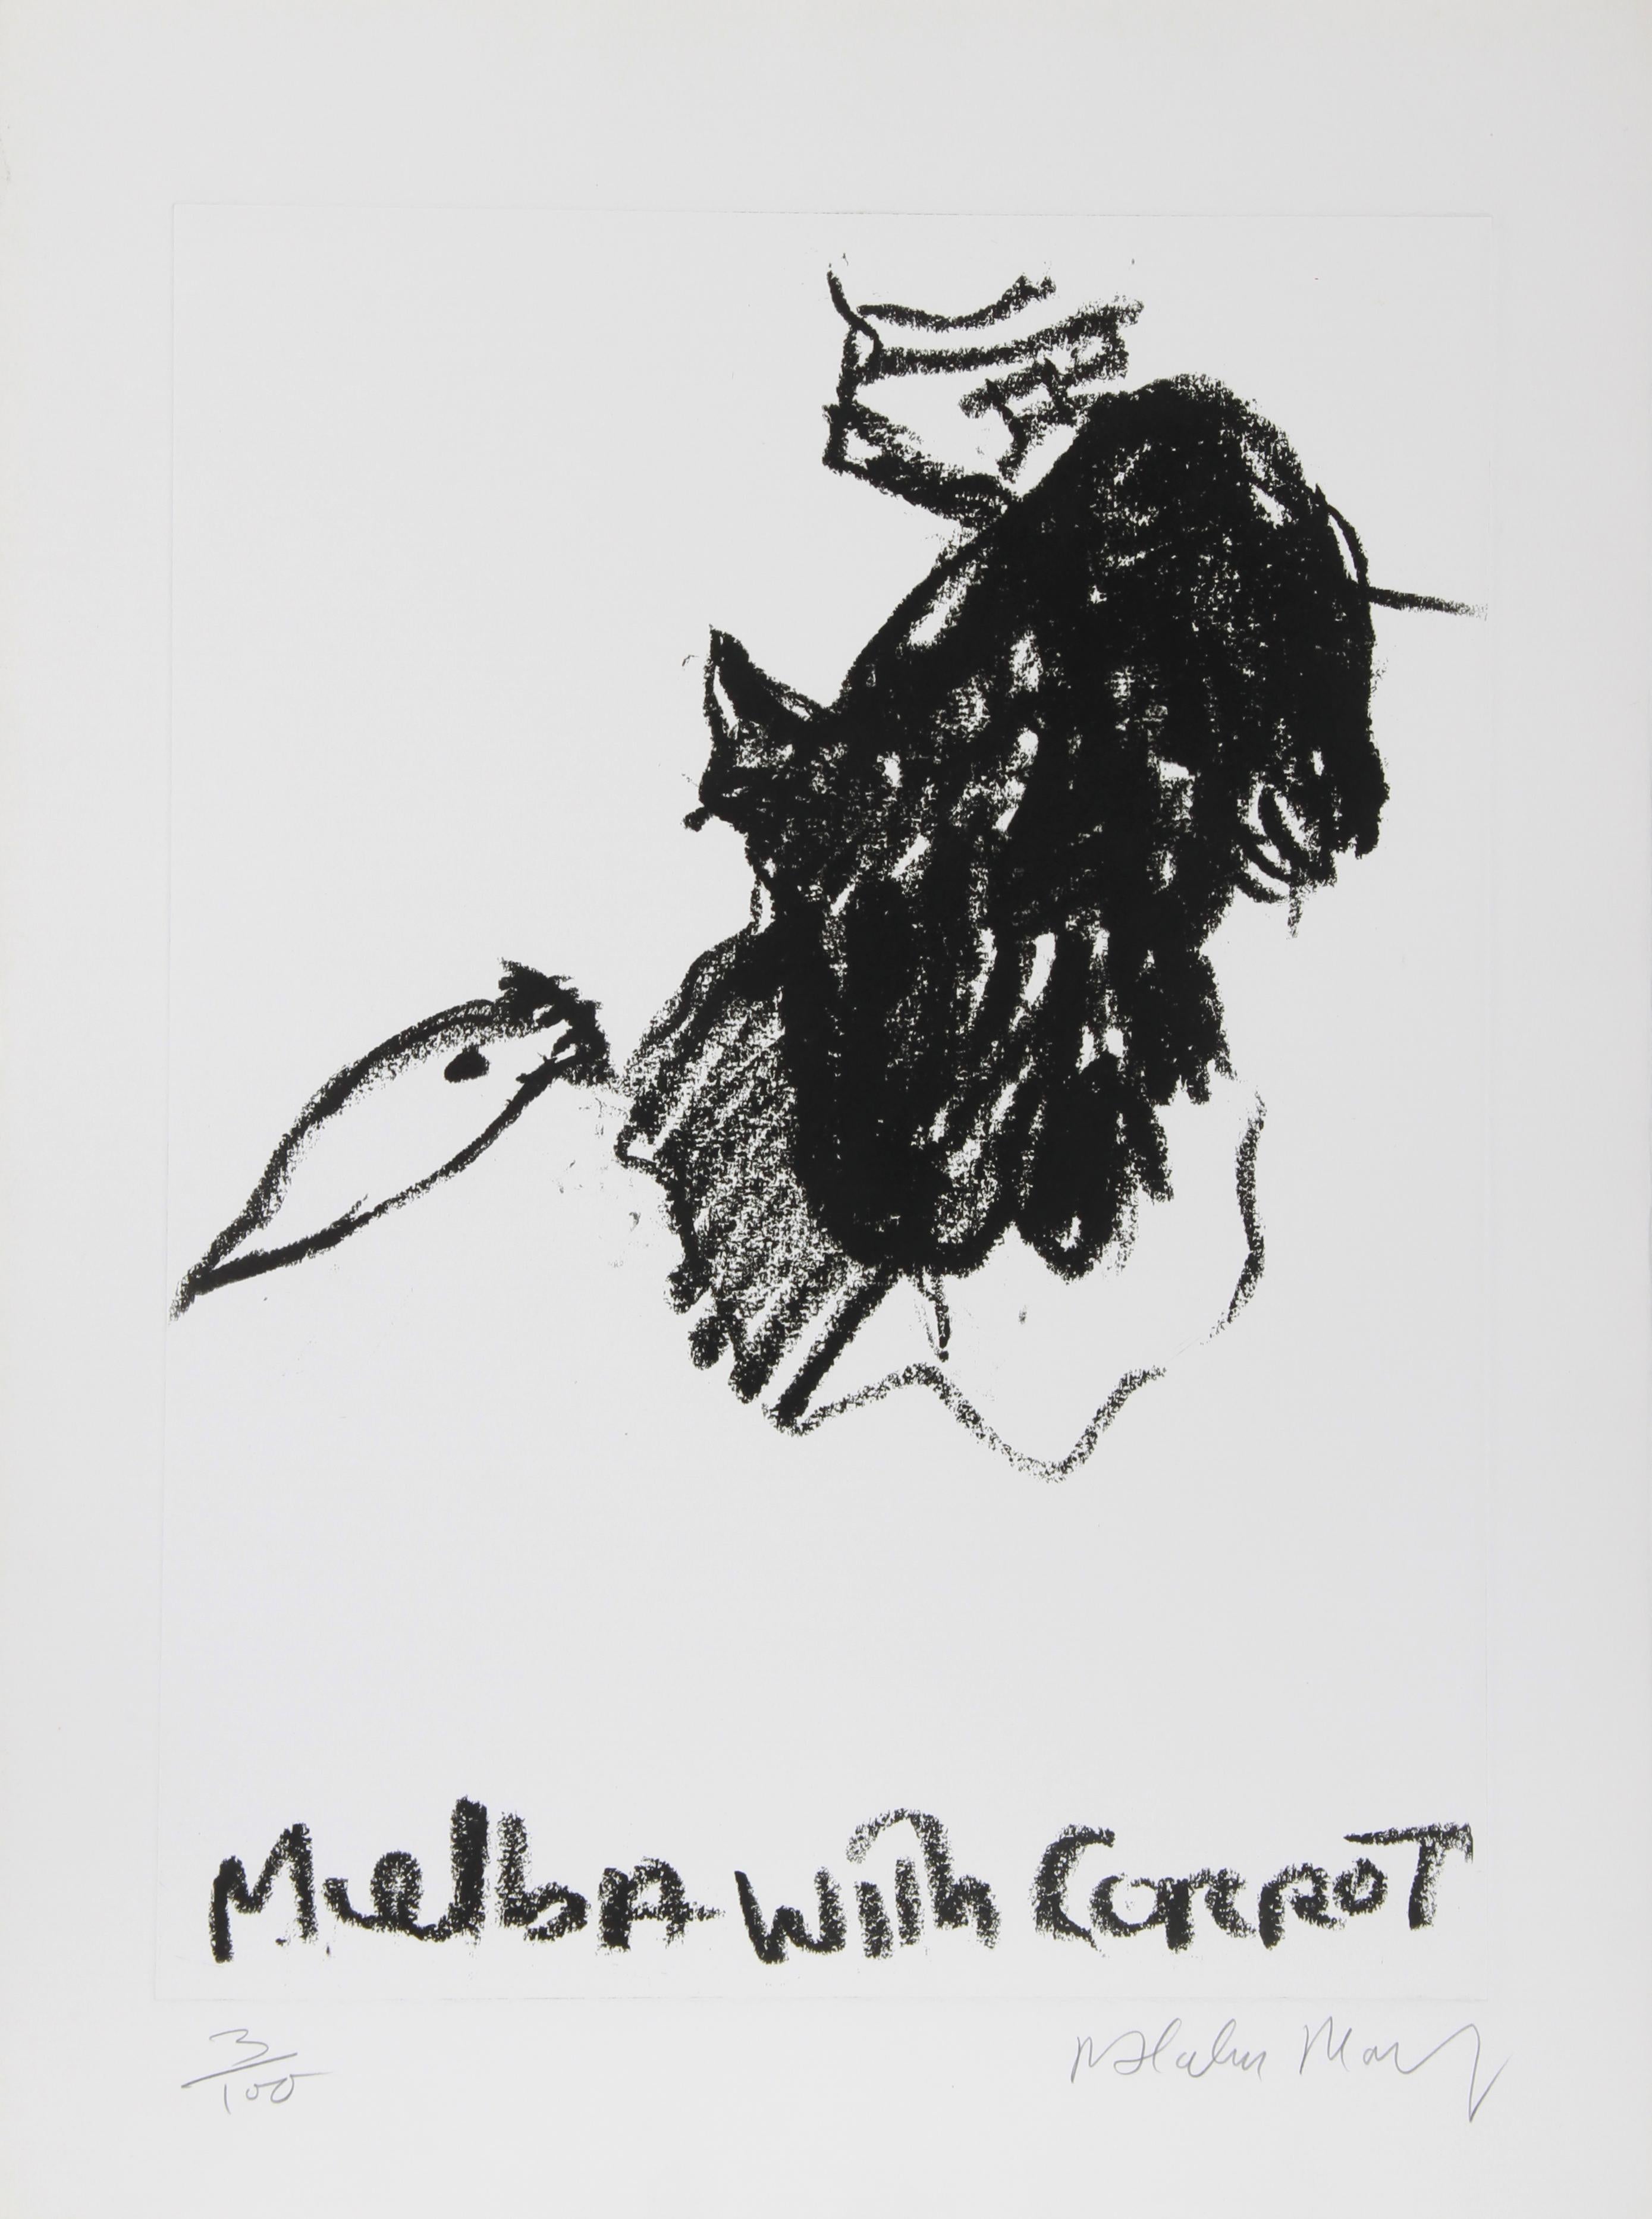 Artist: Malcolm Morley, British (1931 - 2018)
Title: Melba with Carrot
Medium: Etching, signed and numbered in pencil
Edition: 100
Image Size: 22 x 17.5 inches
Size: 30 in. x 22 in. (76.2 cm x 55.88 cm)